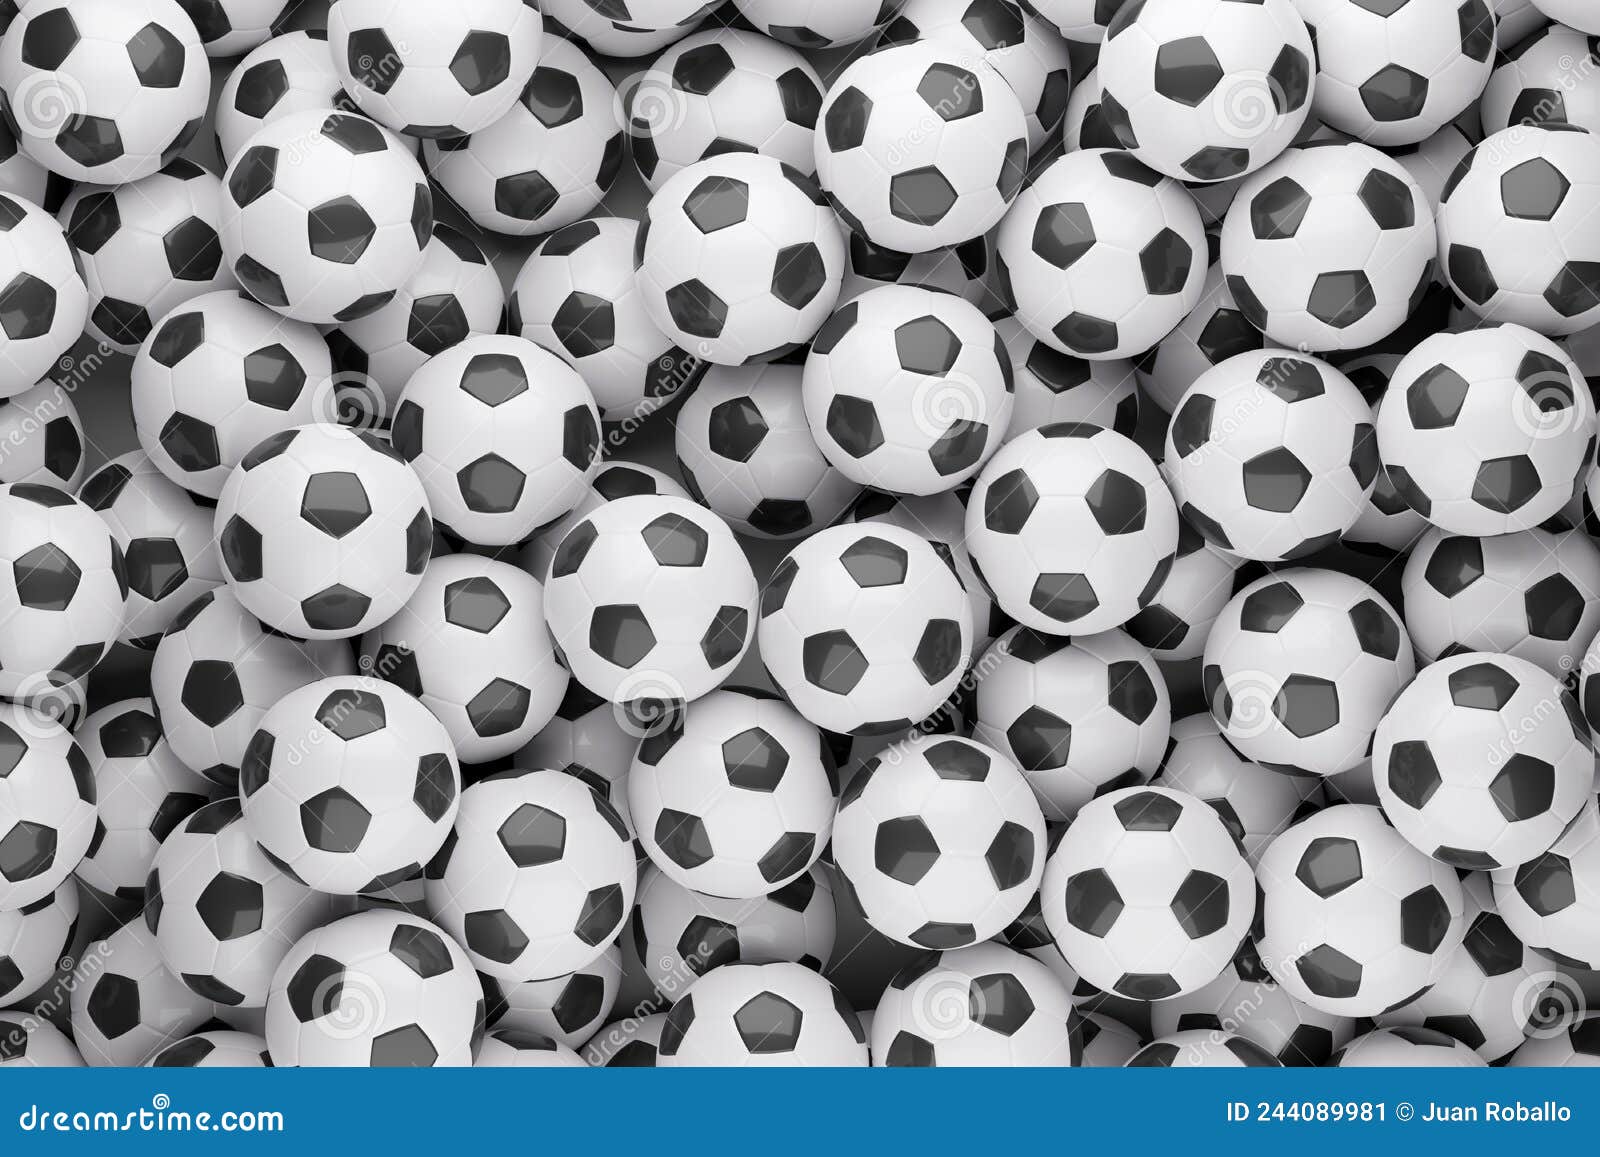 Black and White Soccer Balls Background. Top View Stock Illustration ...